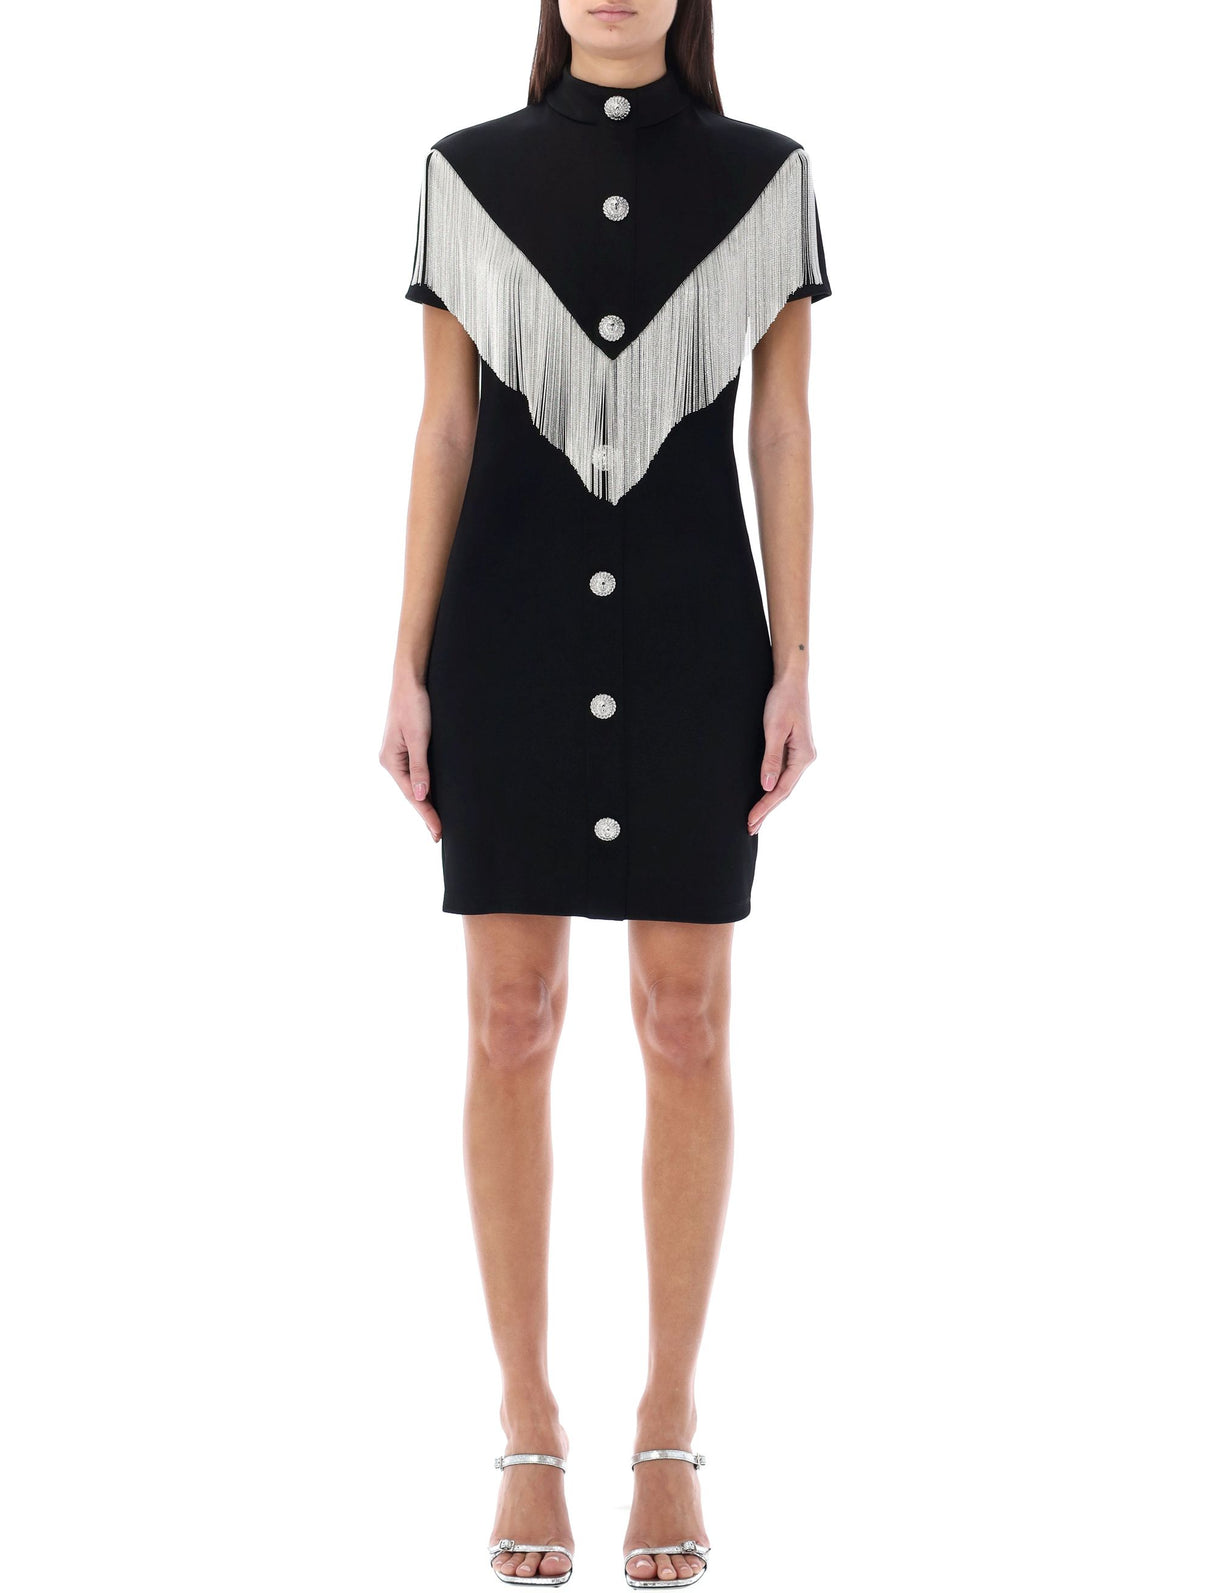 BALMAIN Black Metal Fringed Dress with High Neck and Western Cut-Out